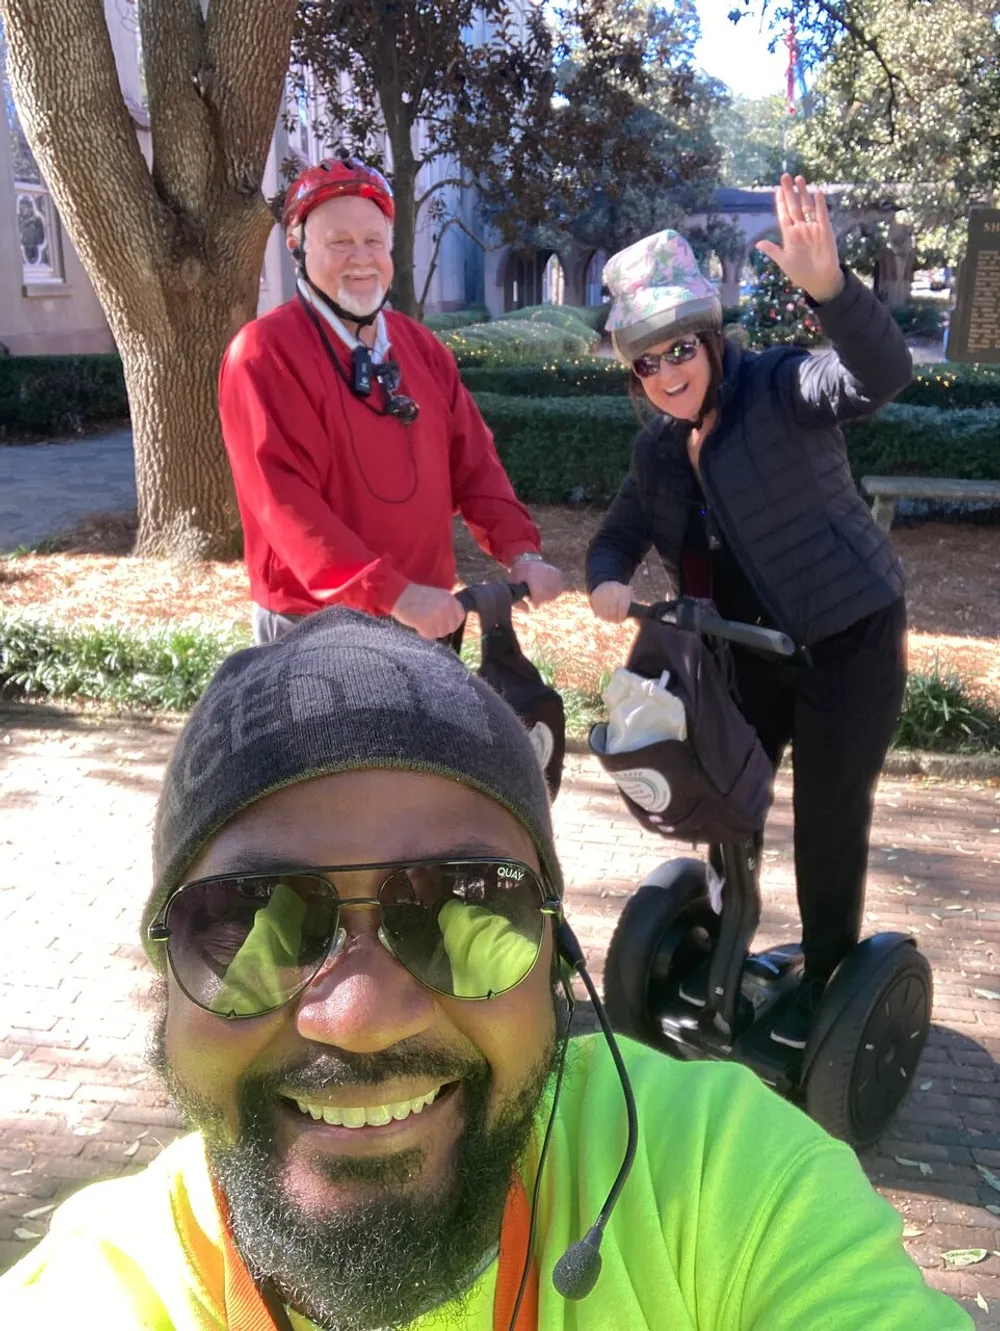 A cheerful group of three people one taking a selfie with two others behind him is enjoying a sunny day outdoors possibly on a Segway tour